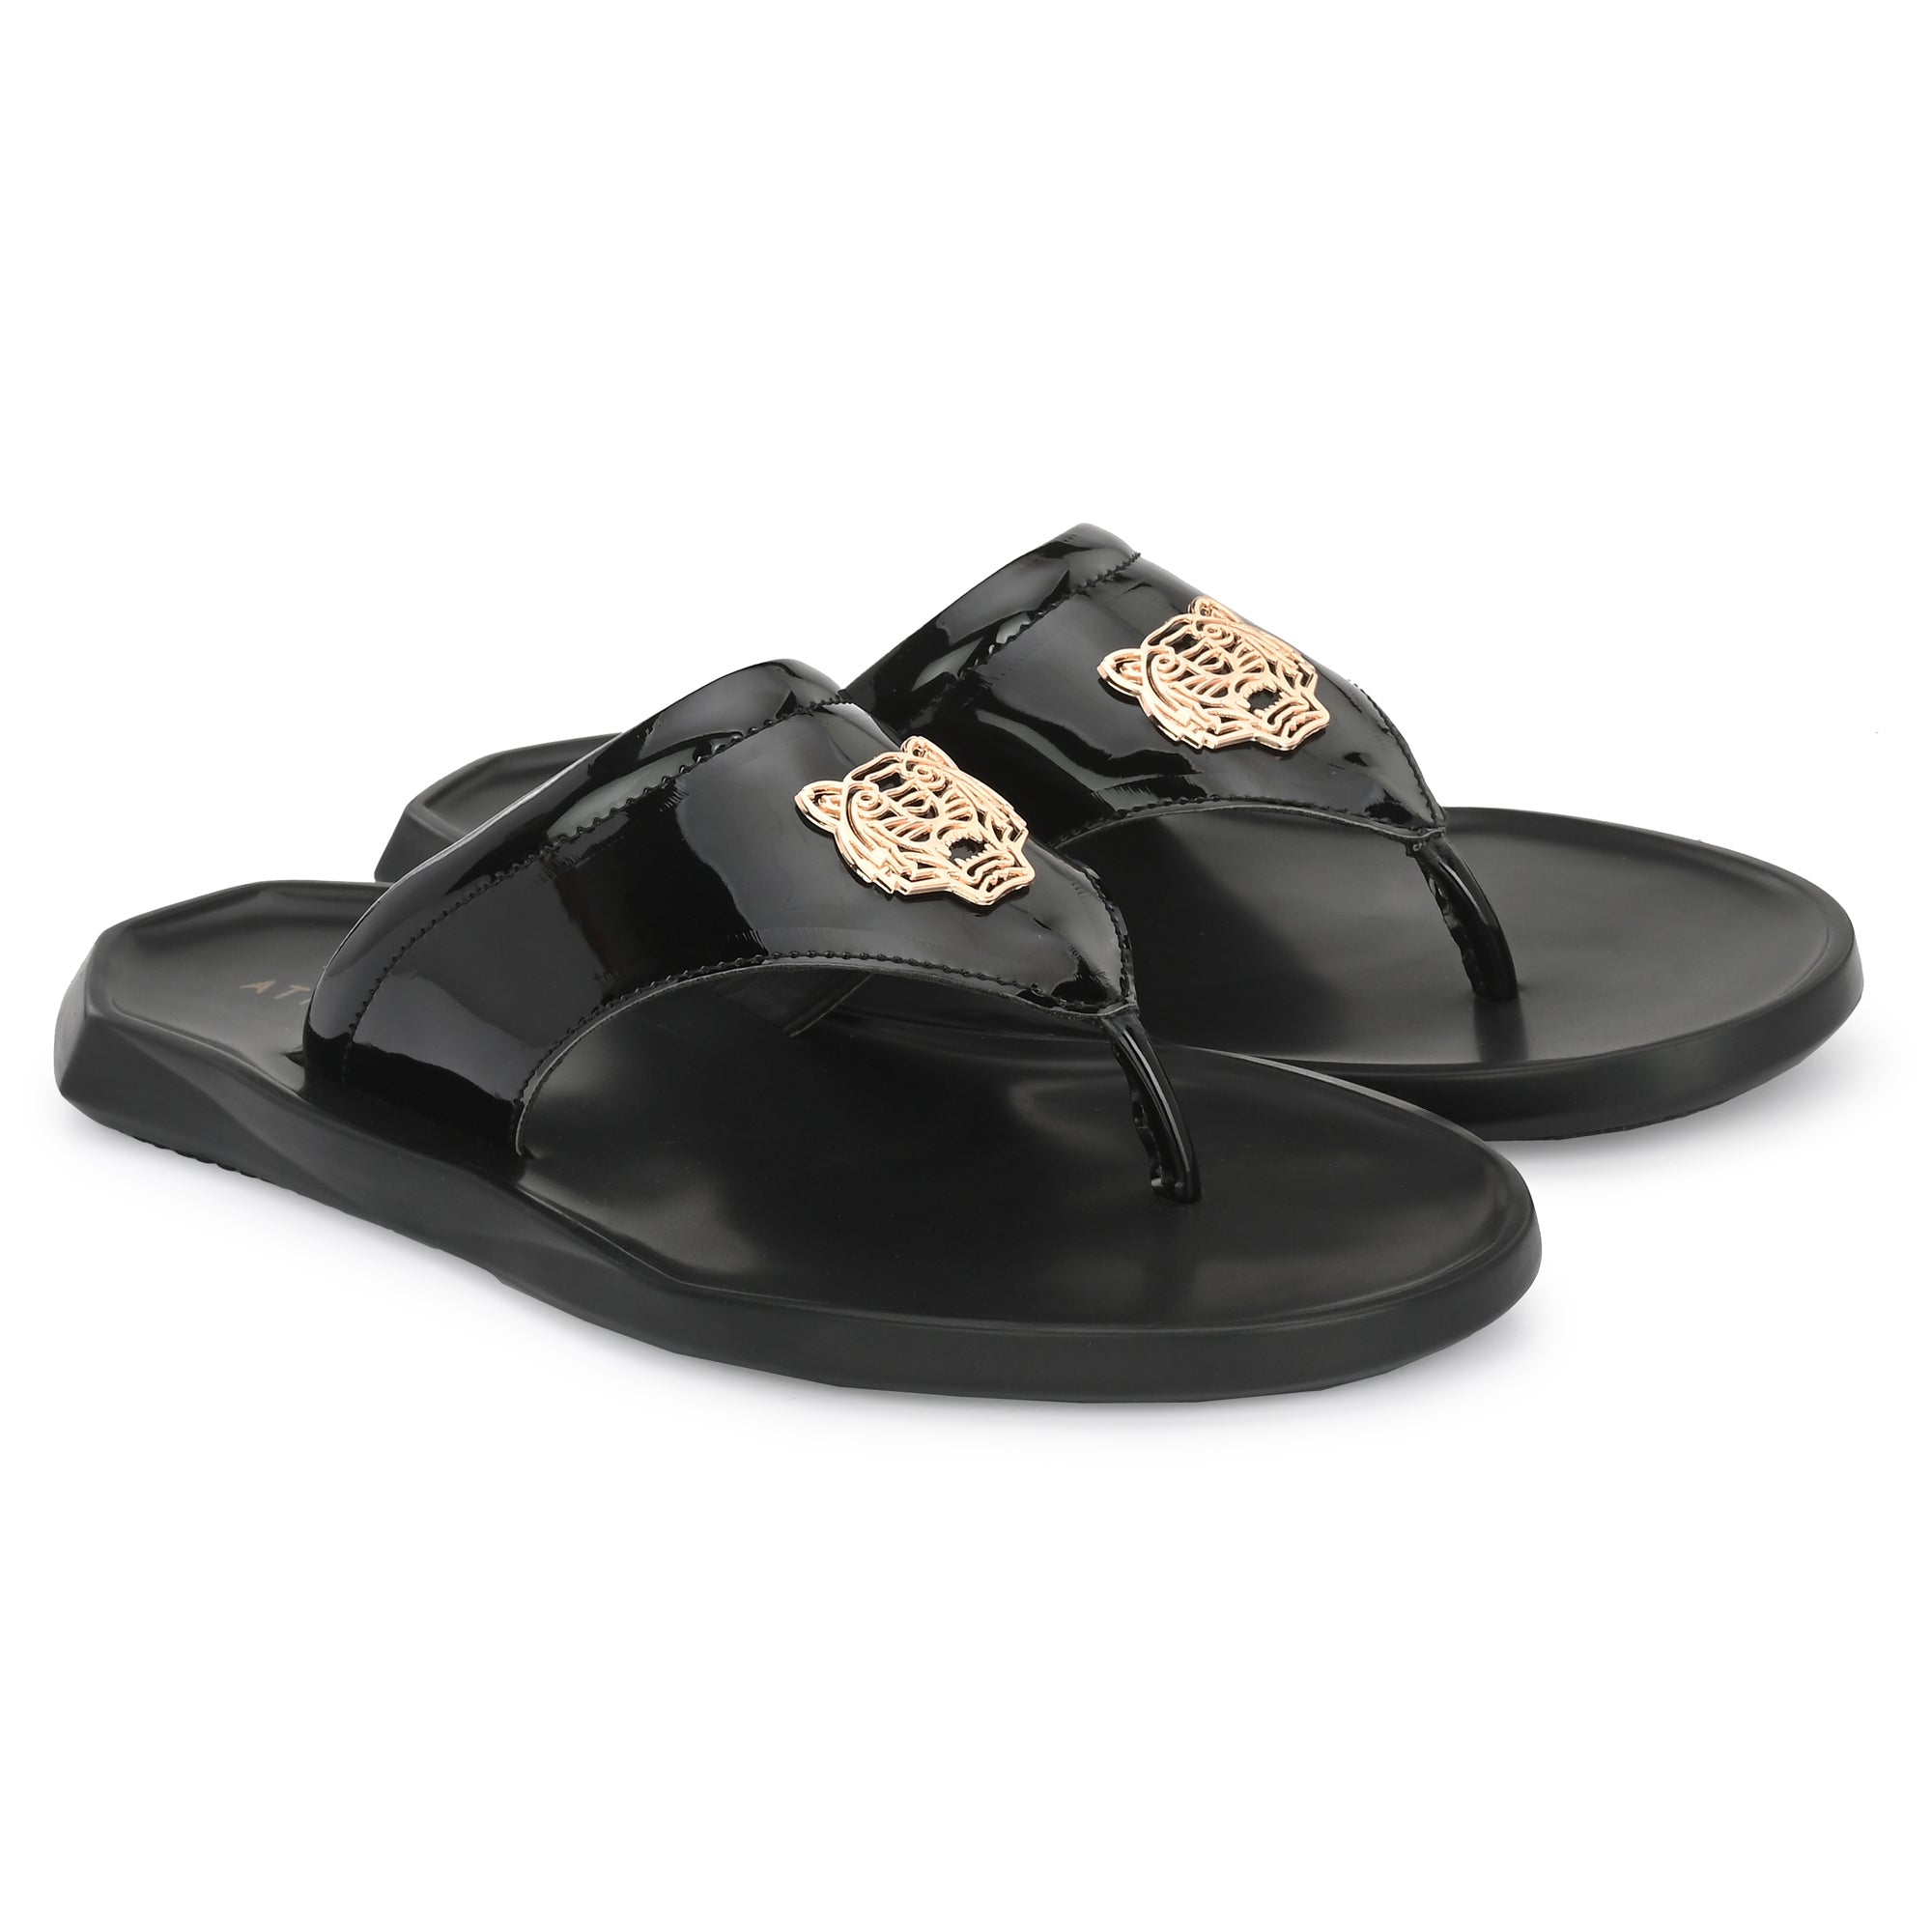 attitudist-glossy-black-thong-slippers-for-men-with-tiger-brooch